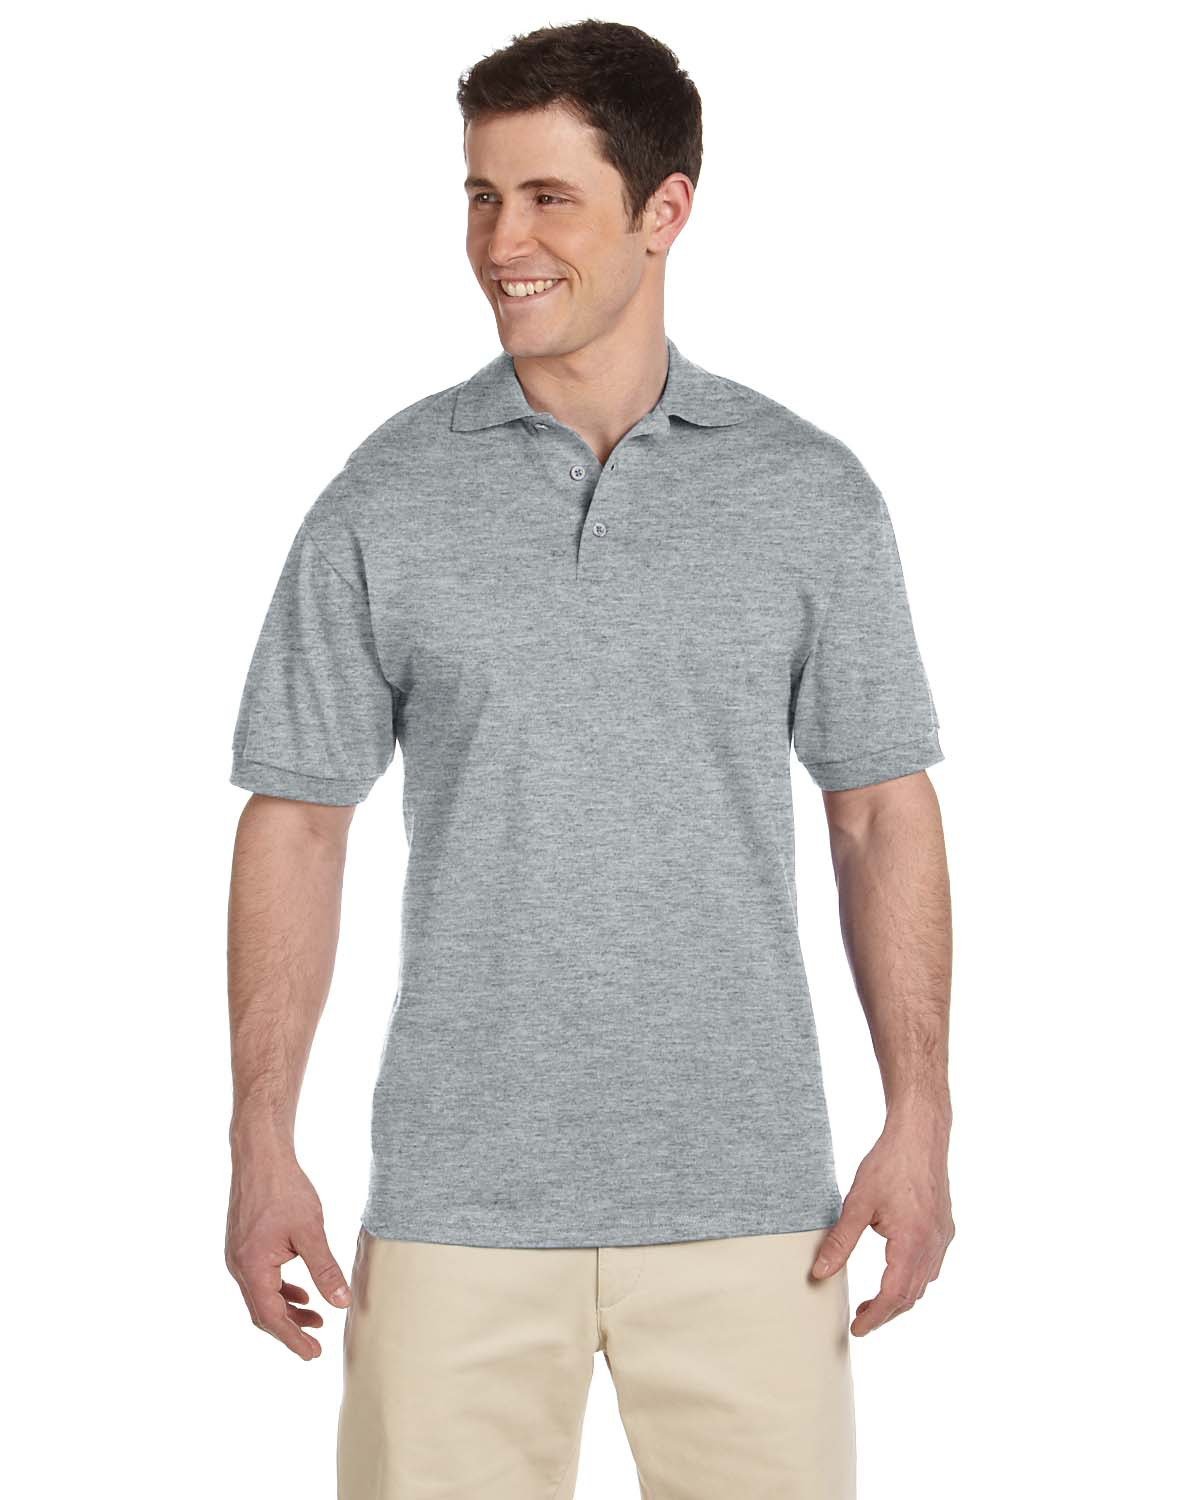 Jerzees Adult Heavyweight Cotton™ Jersey Polo ATHLETIC HEATHER 